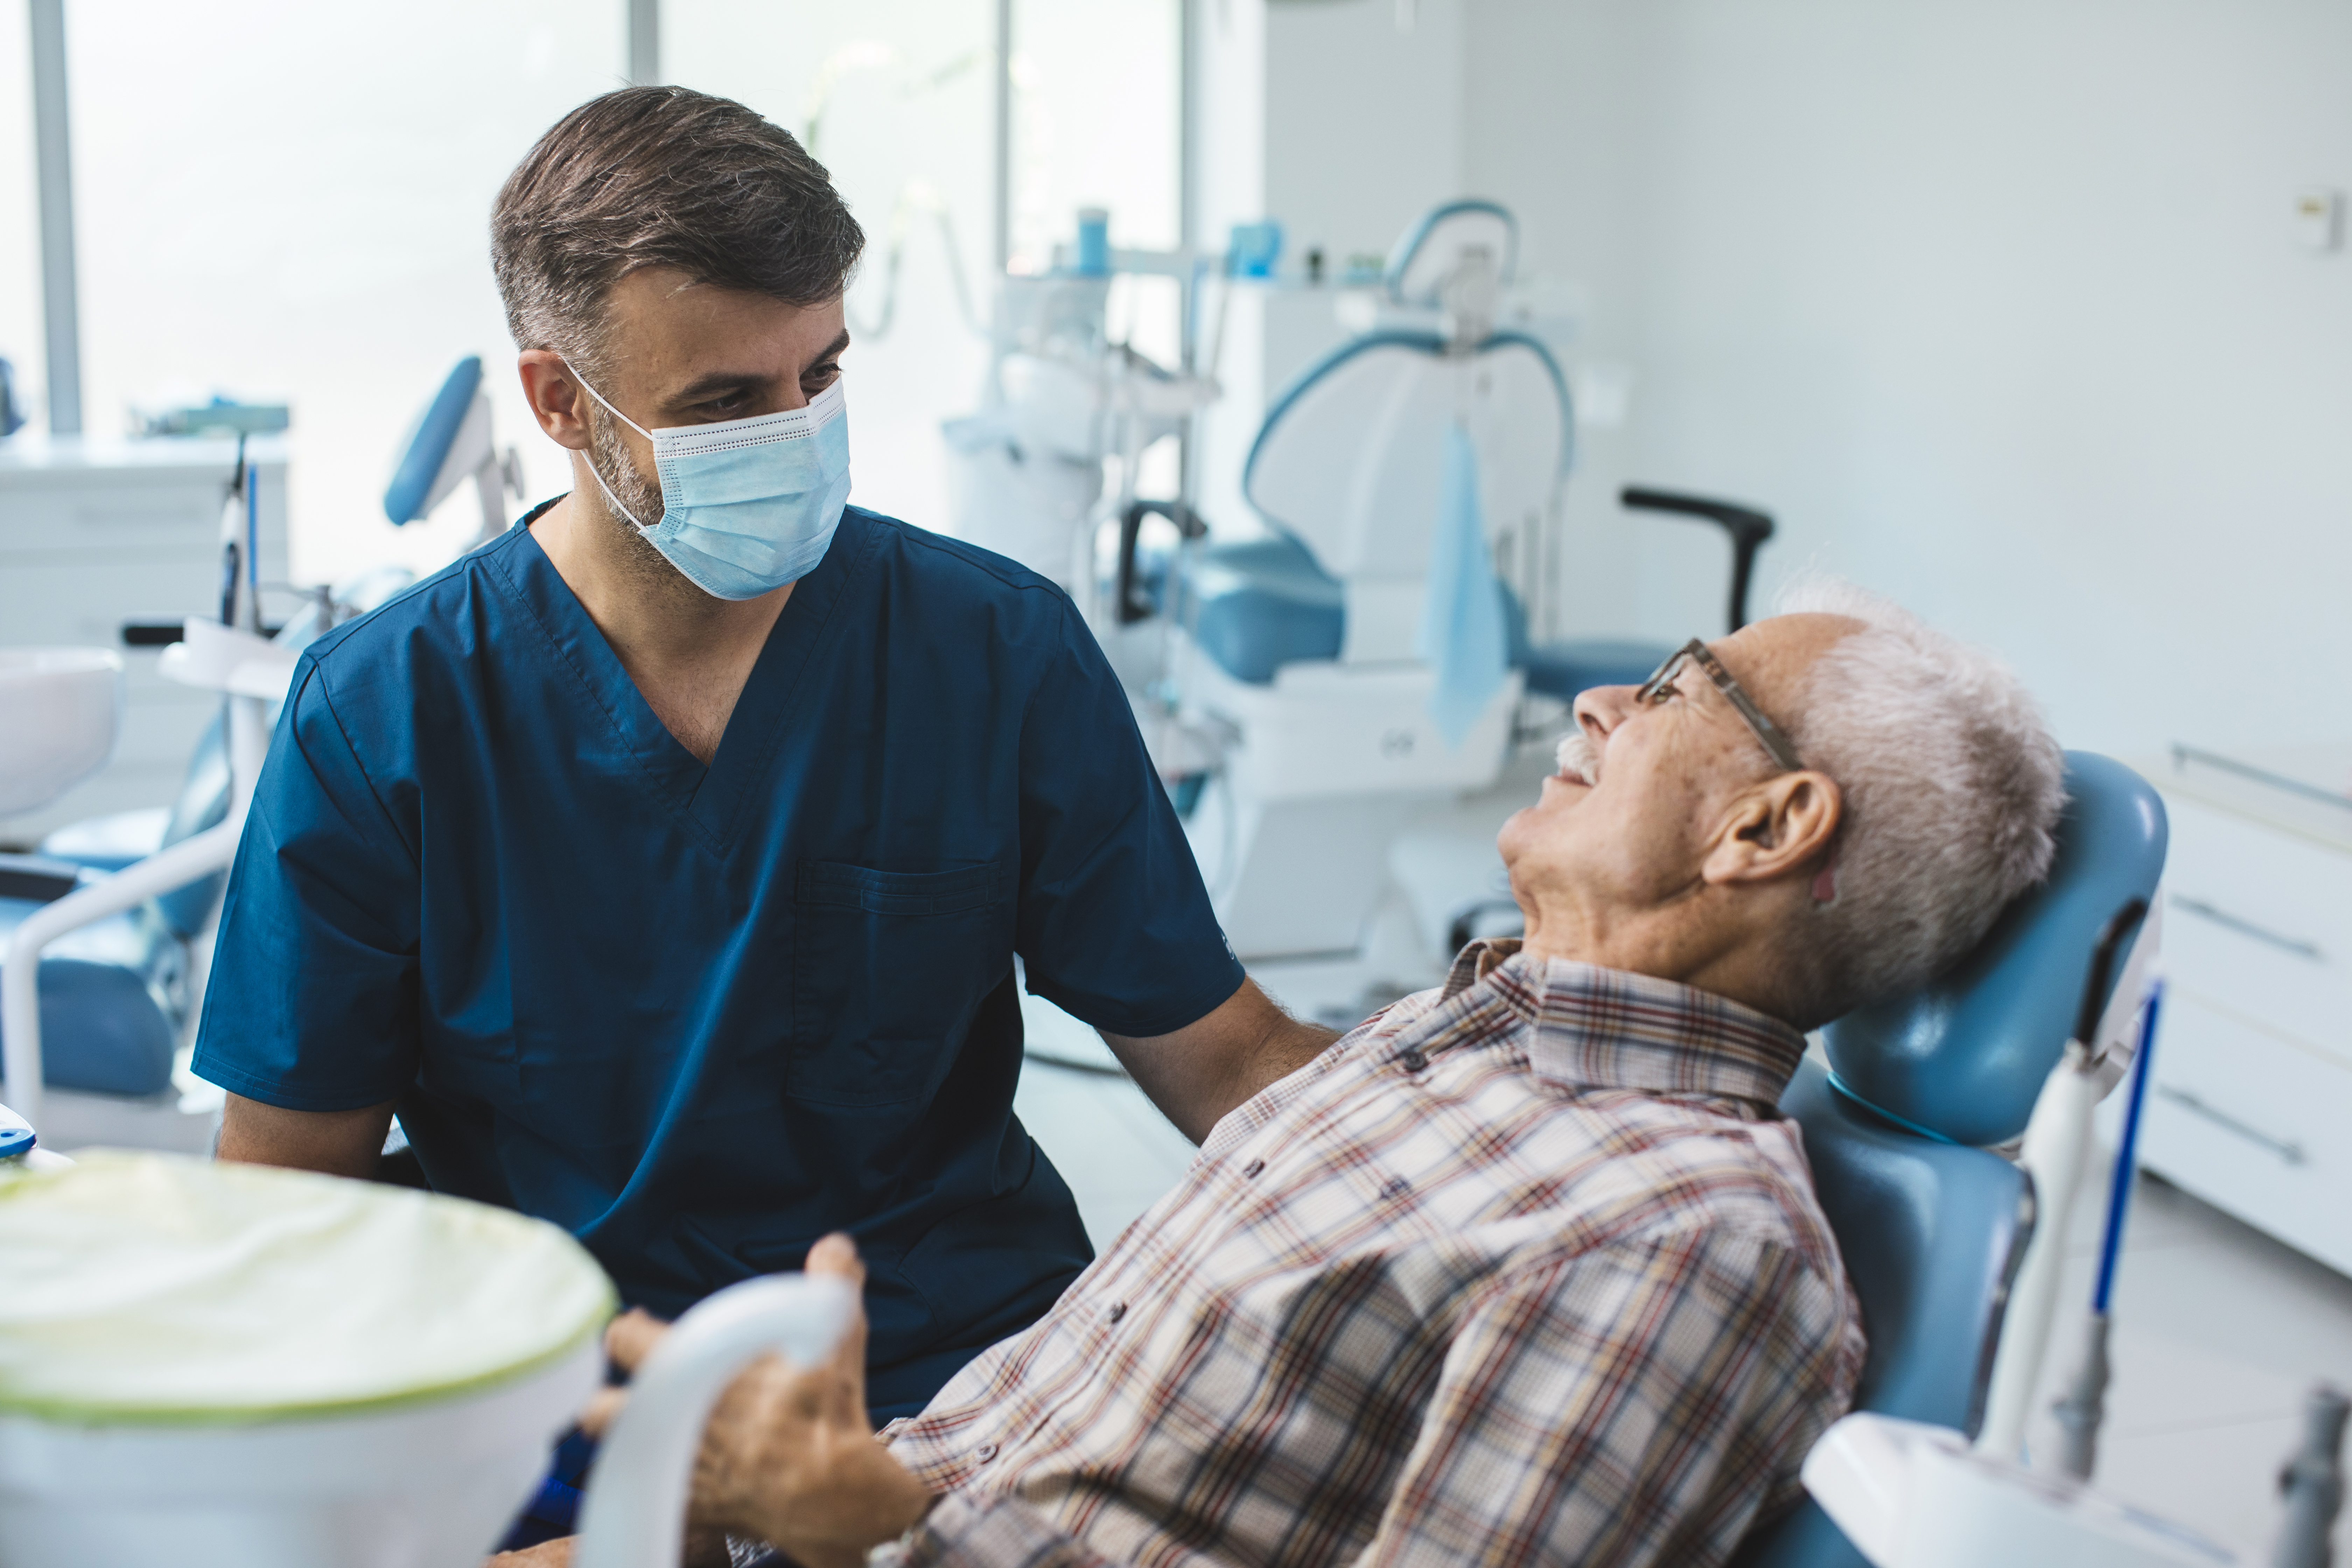 A dentist wearing a facemask speaks to an elderly man in a reclined chair